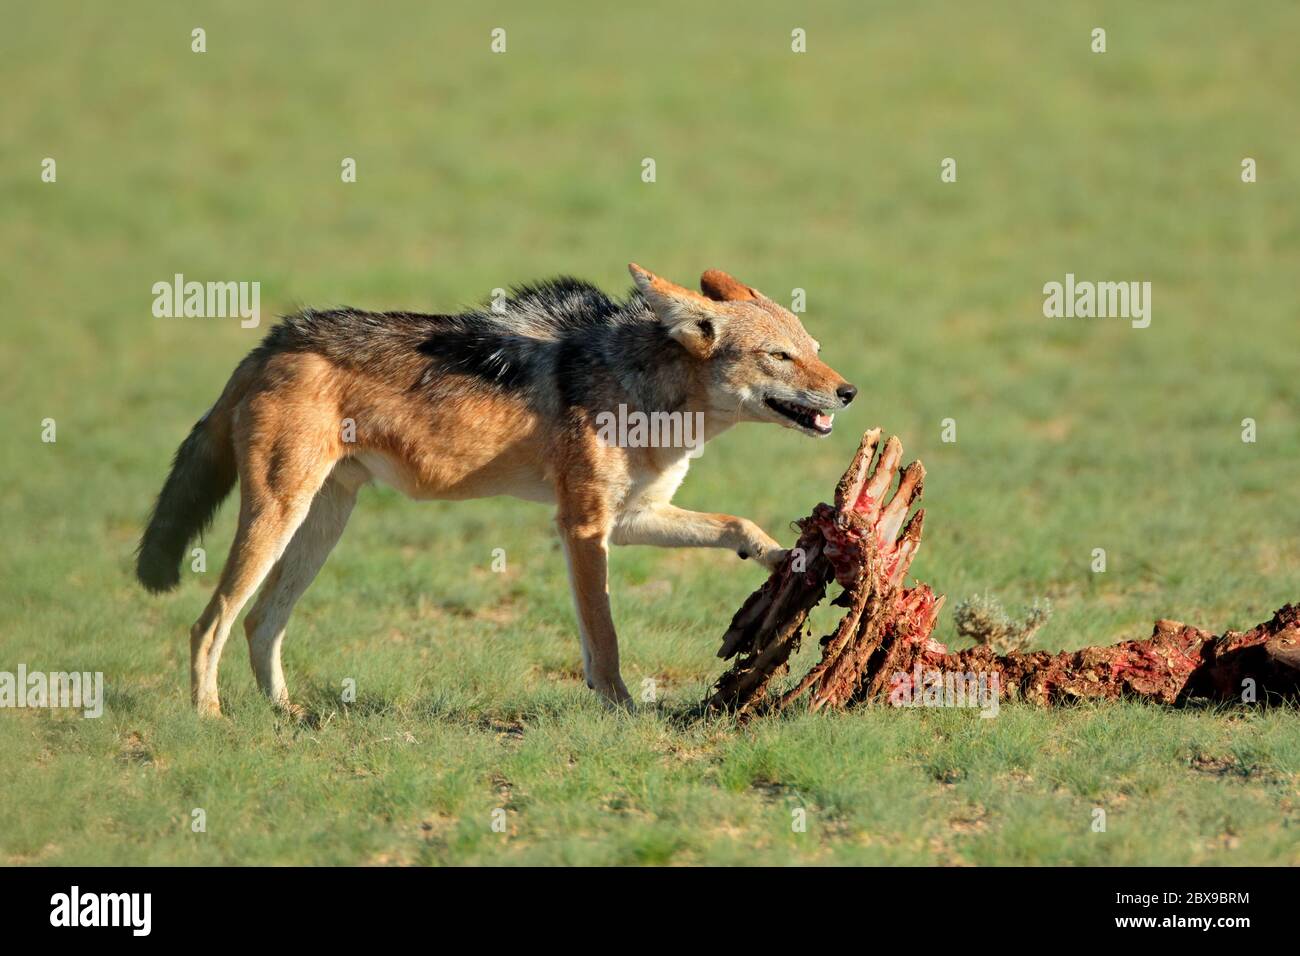 Black-backed jackals (Canis mesomelas) scavenging the remains of an antelope, Kalahari, South Africa Stock Photo